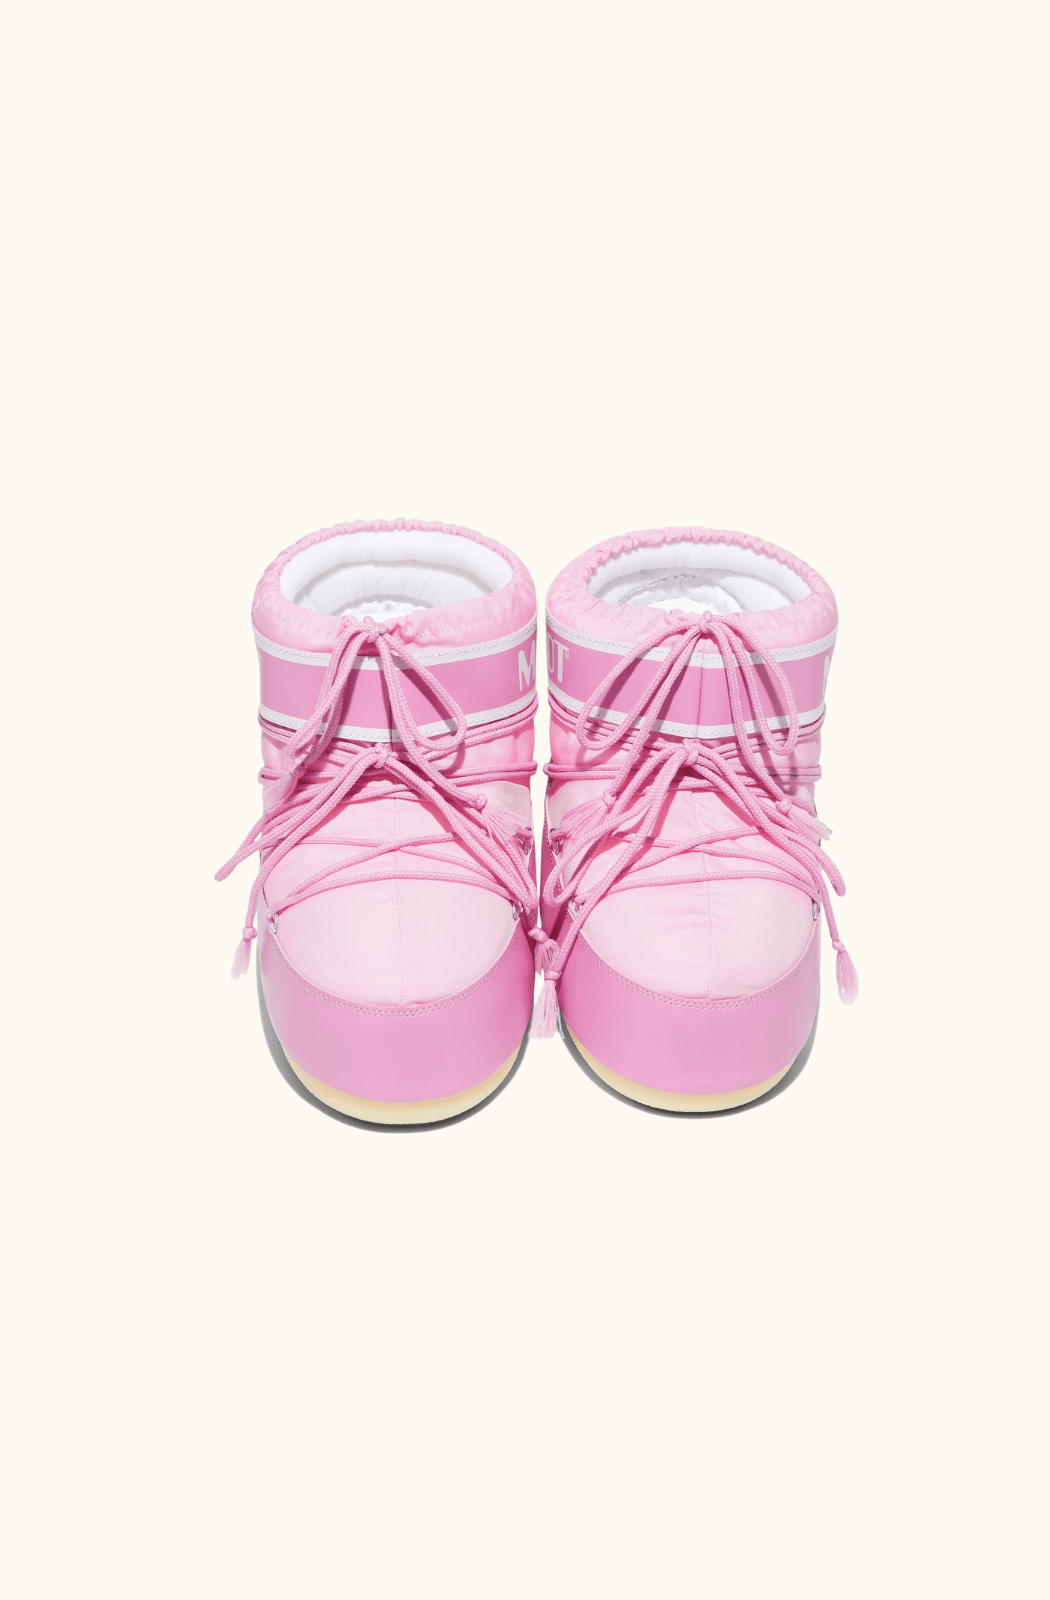 Copy of Moon Boot Nylon Icon Low - Pink